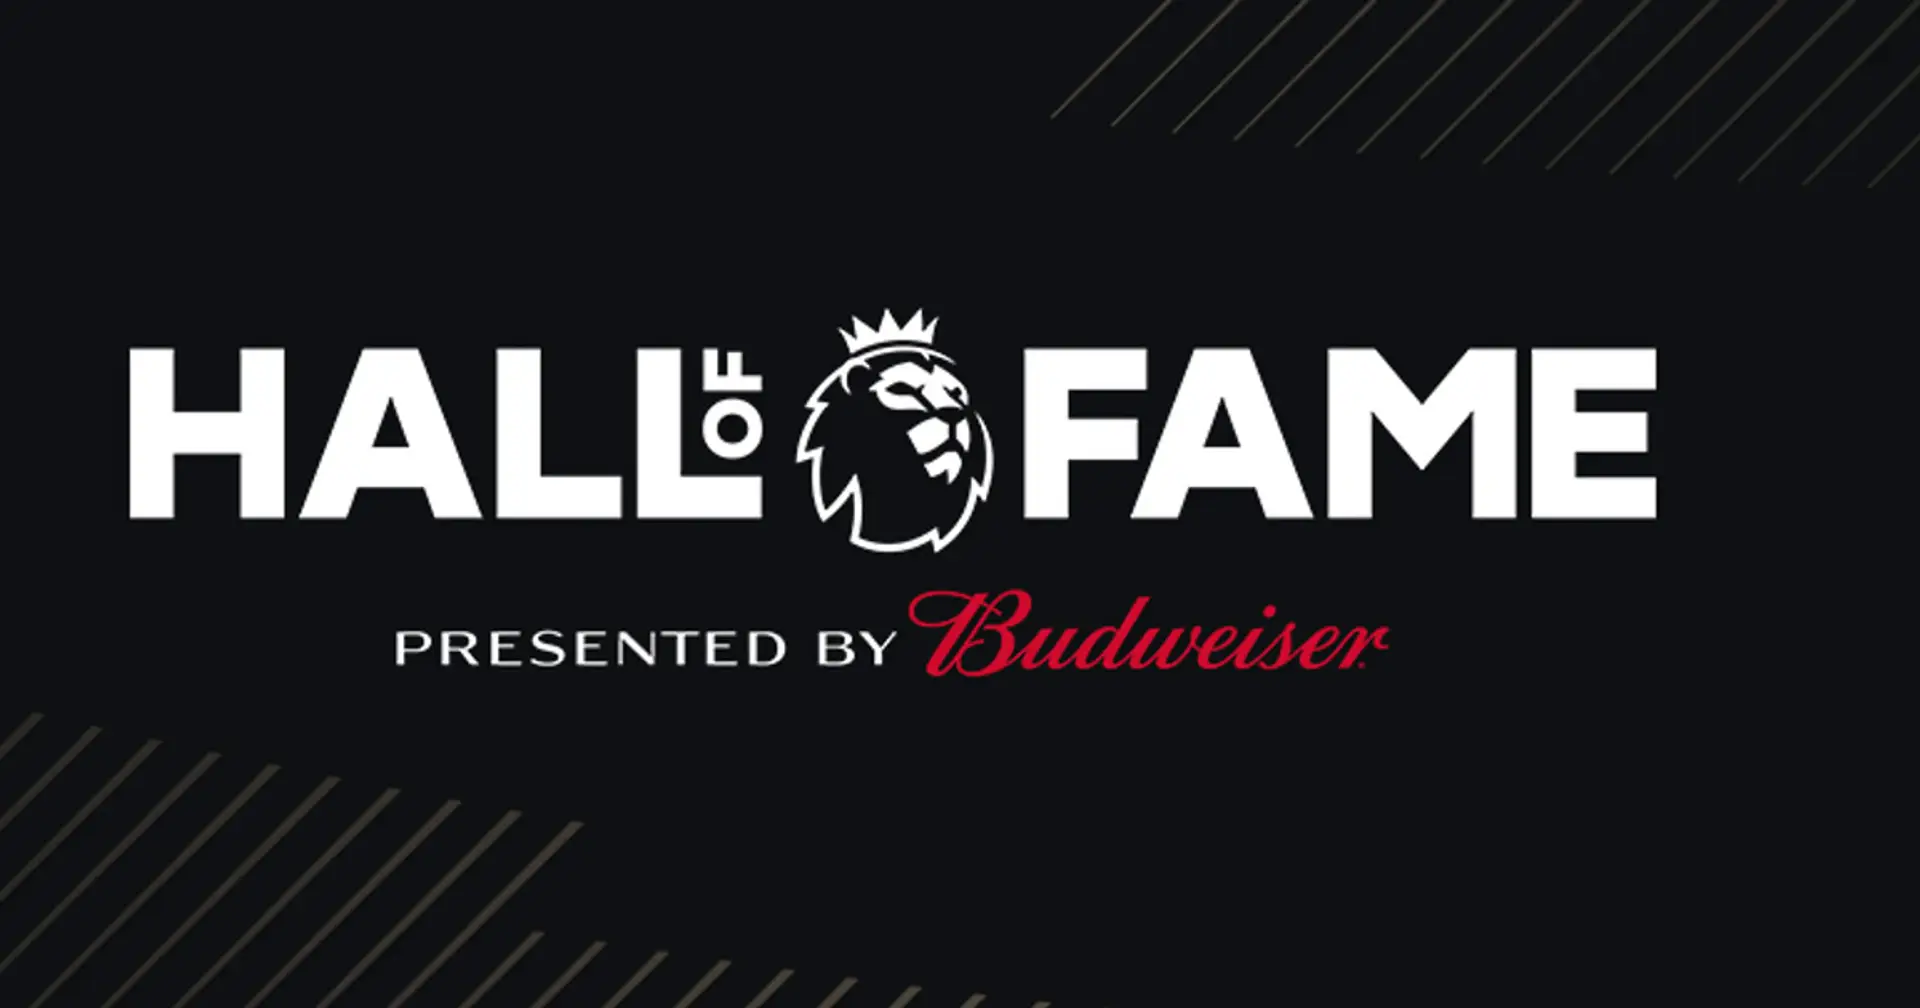 How many former Arsenal players are in Premier League Hall of Fame?